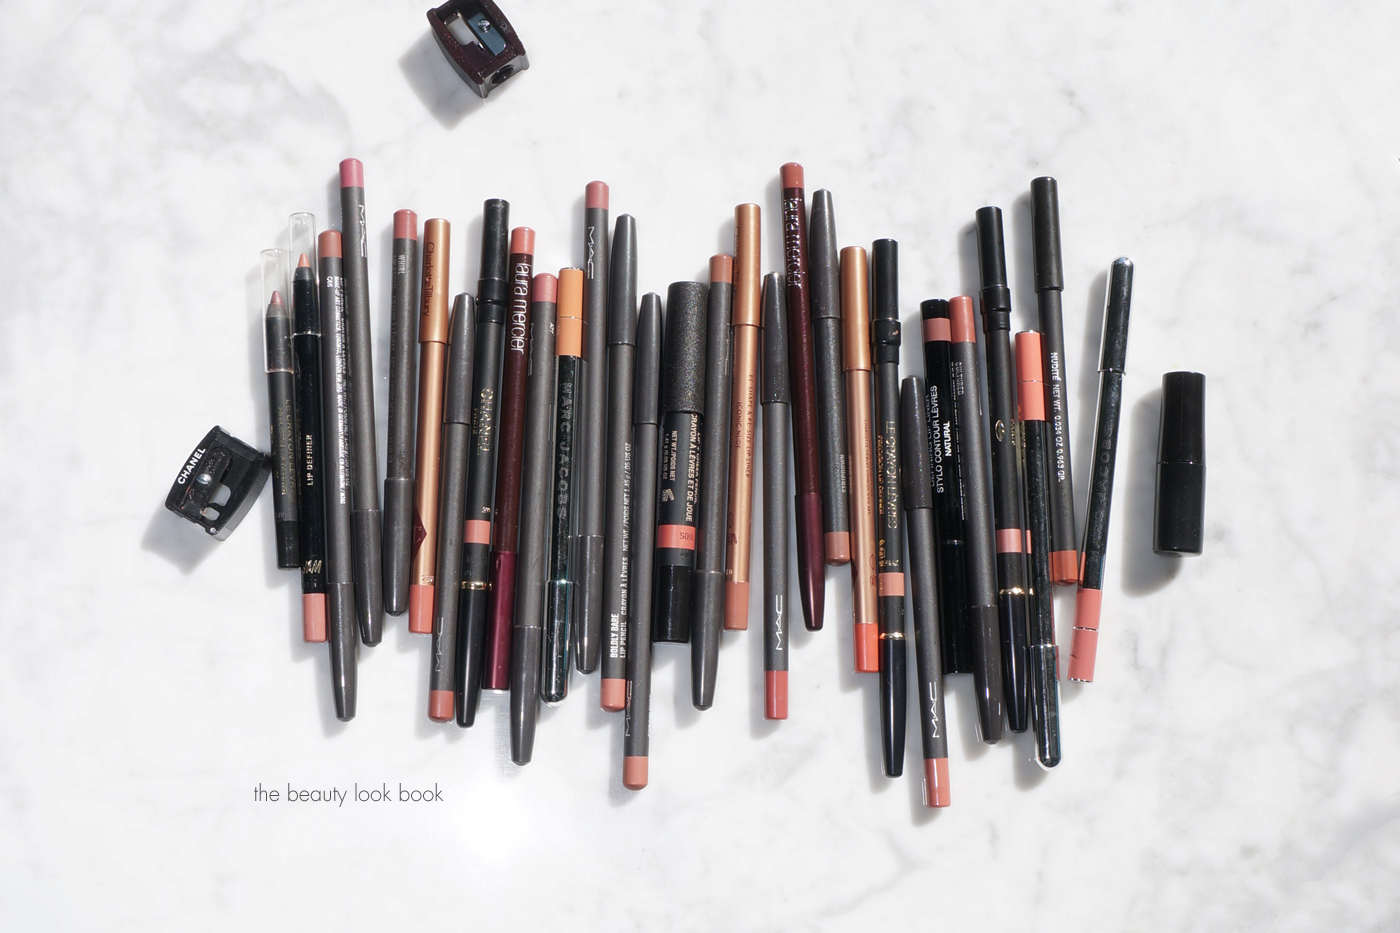 My Favorite Neutral Pink and Nude Lip Liner Pencils - The Beauty